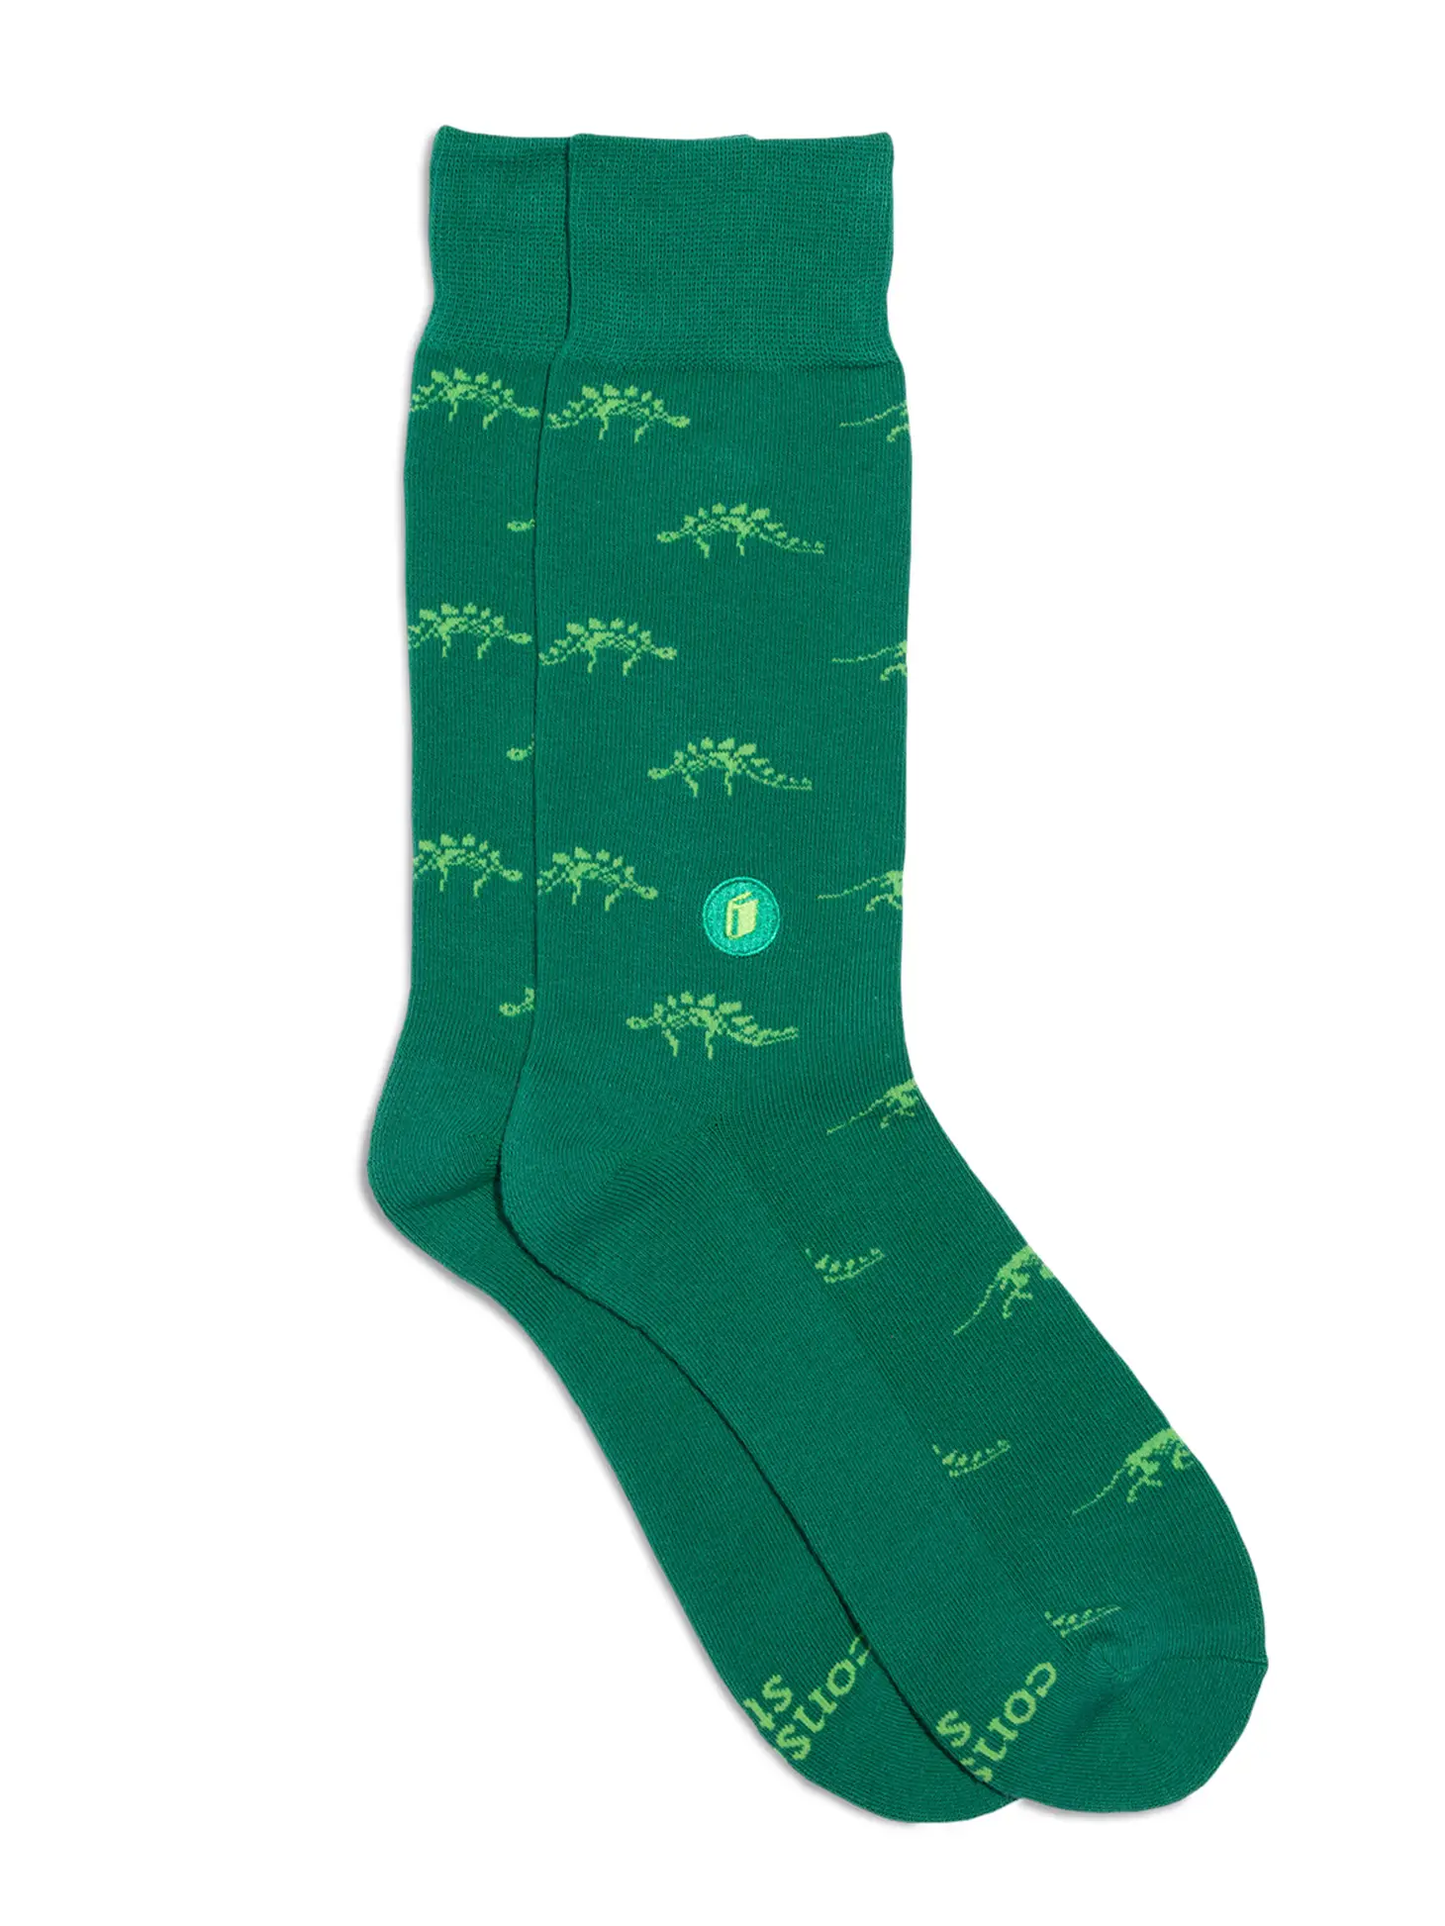 Socks That Give Books Dinosaurs